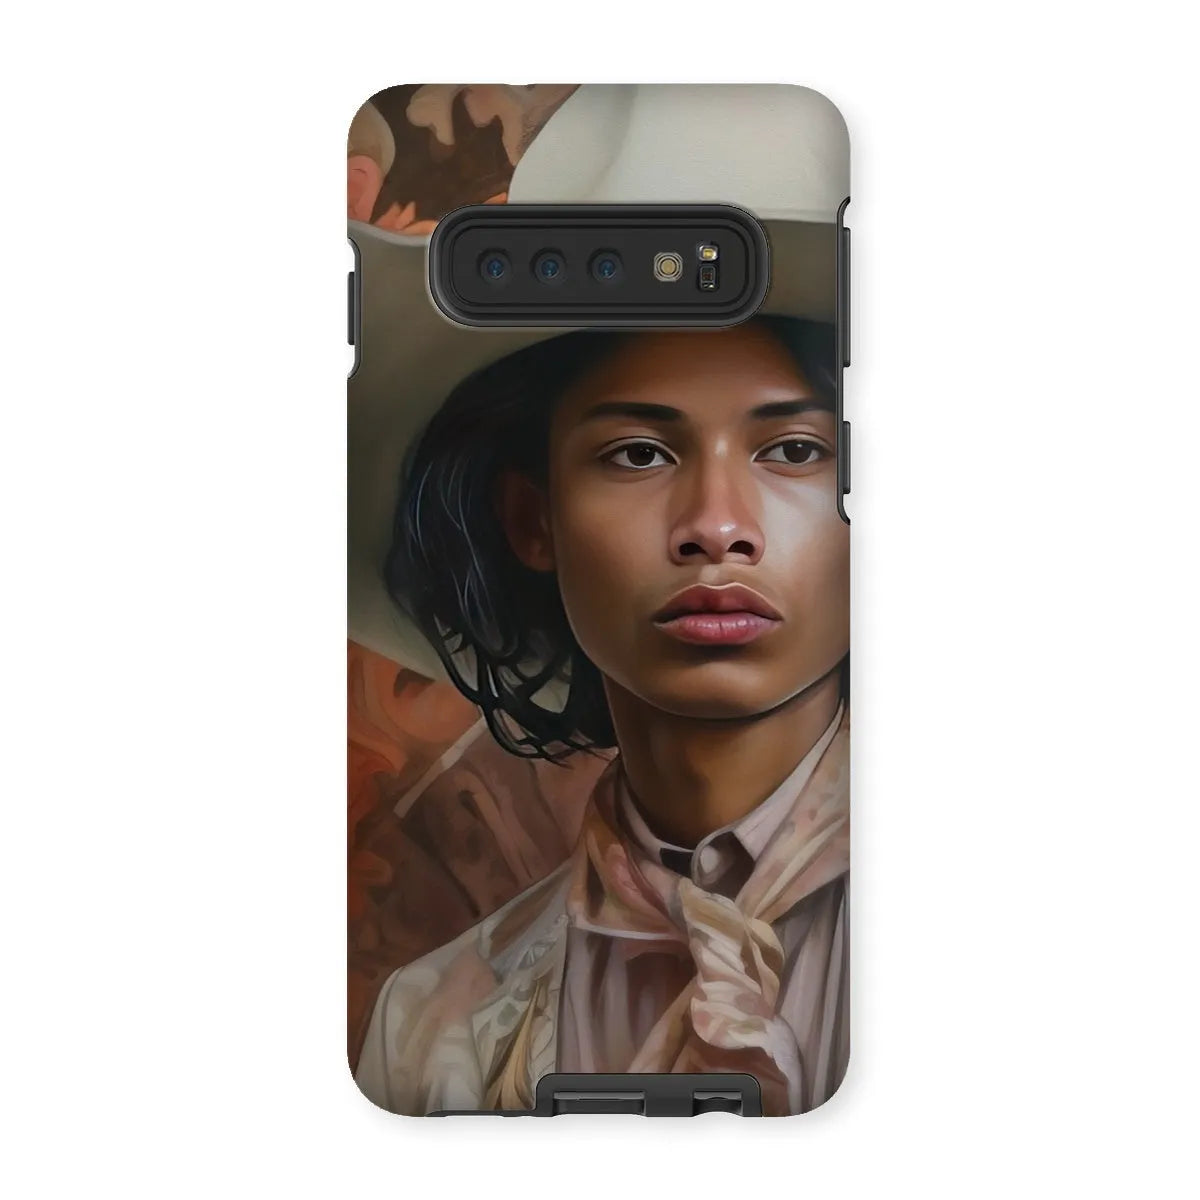 Arjuna The Gay Cowboy - Gay Aesthetic Art Phone Case - Samsung Galaxy S10 / Matte - Mobile Phone Cases - Aesthetic Art